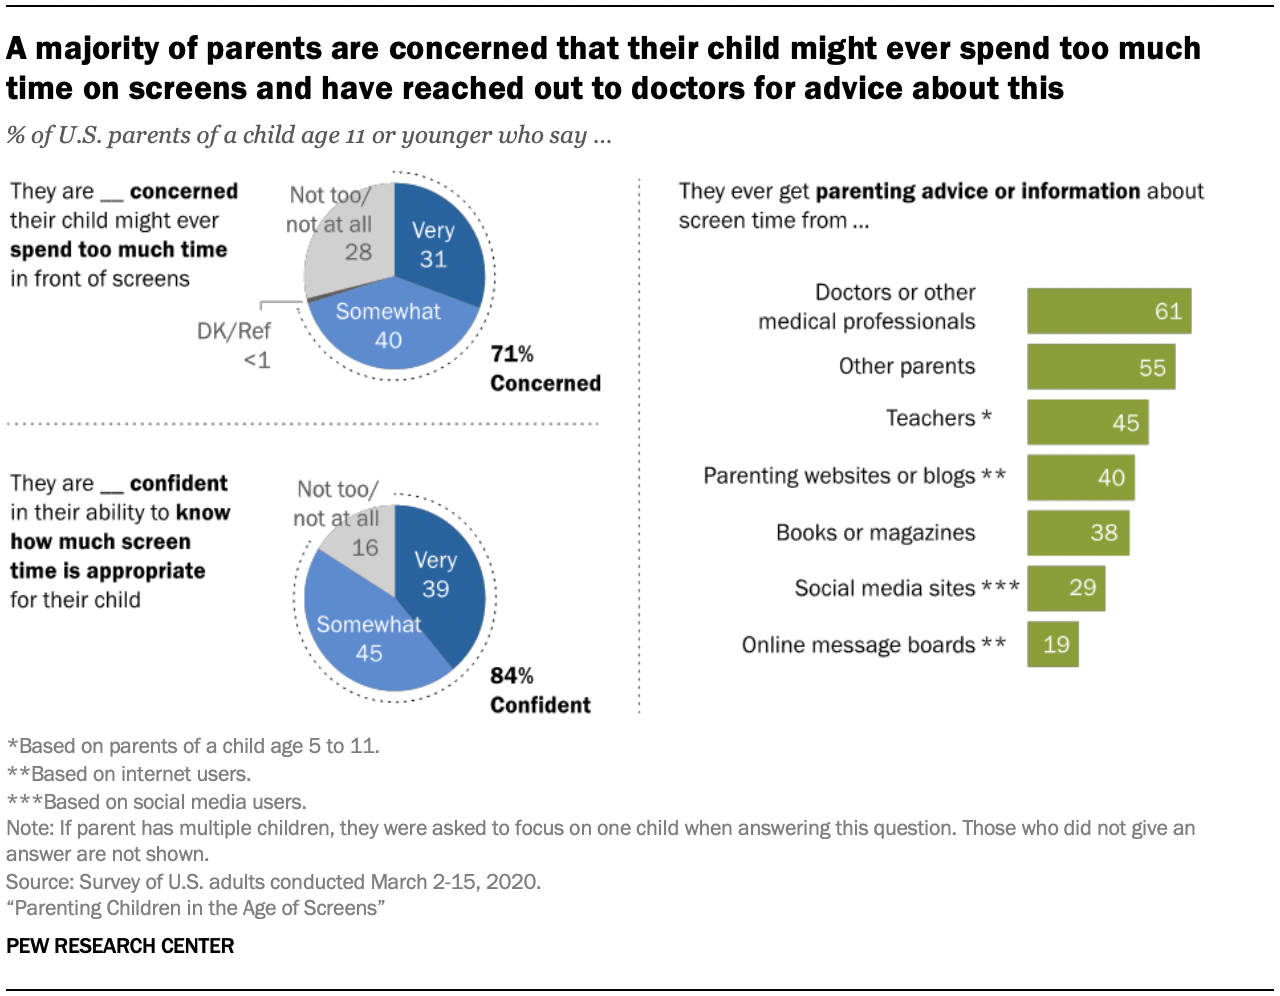 effects of bad parenting statistics